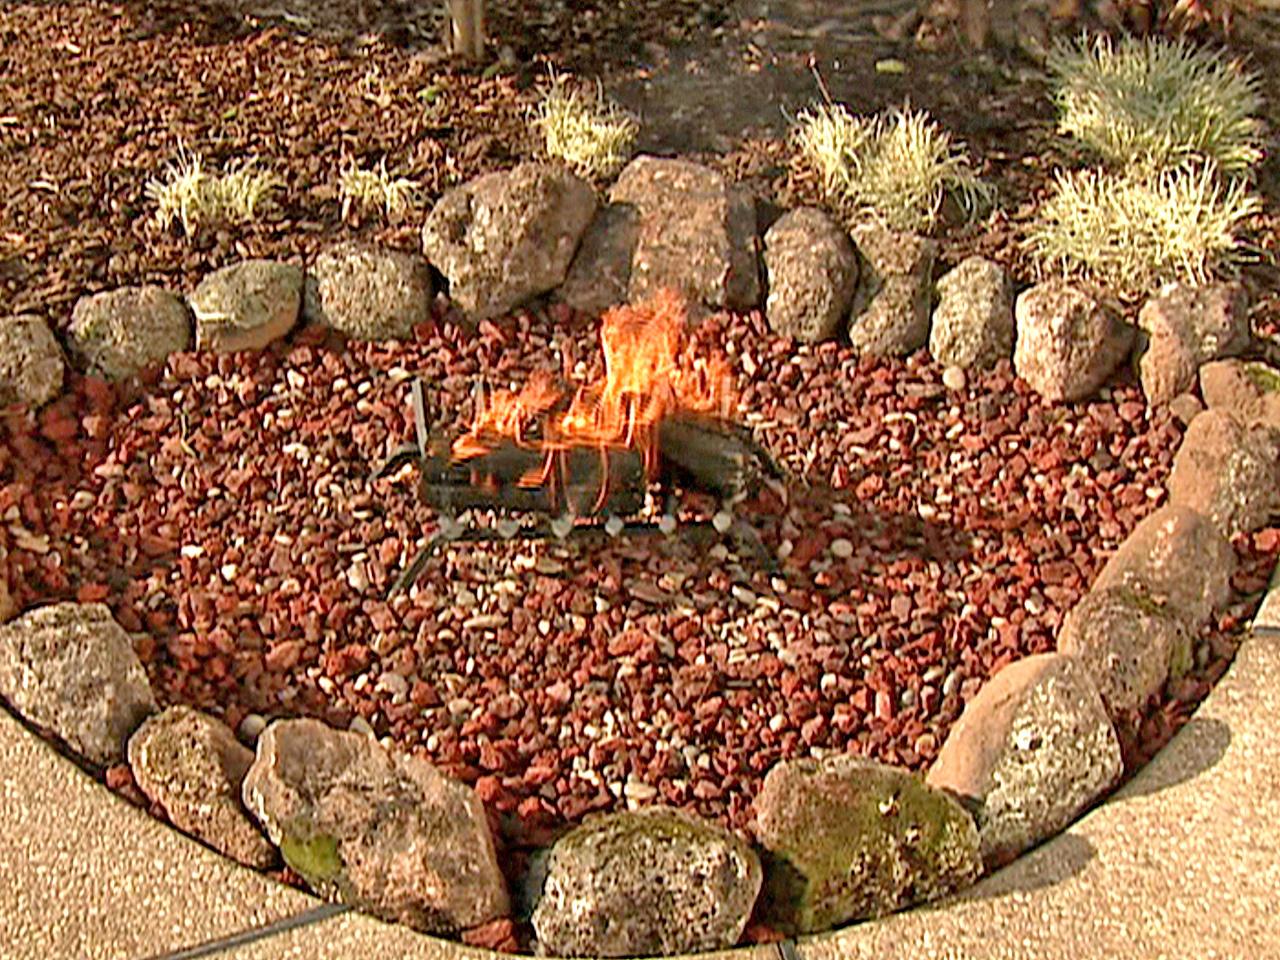 Outdoor Fire Pits And Pit Safety, Wood Chips For Fire Pit